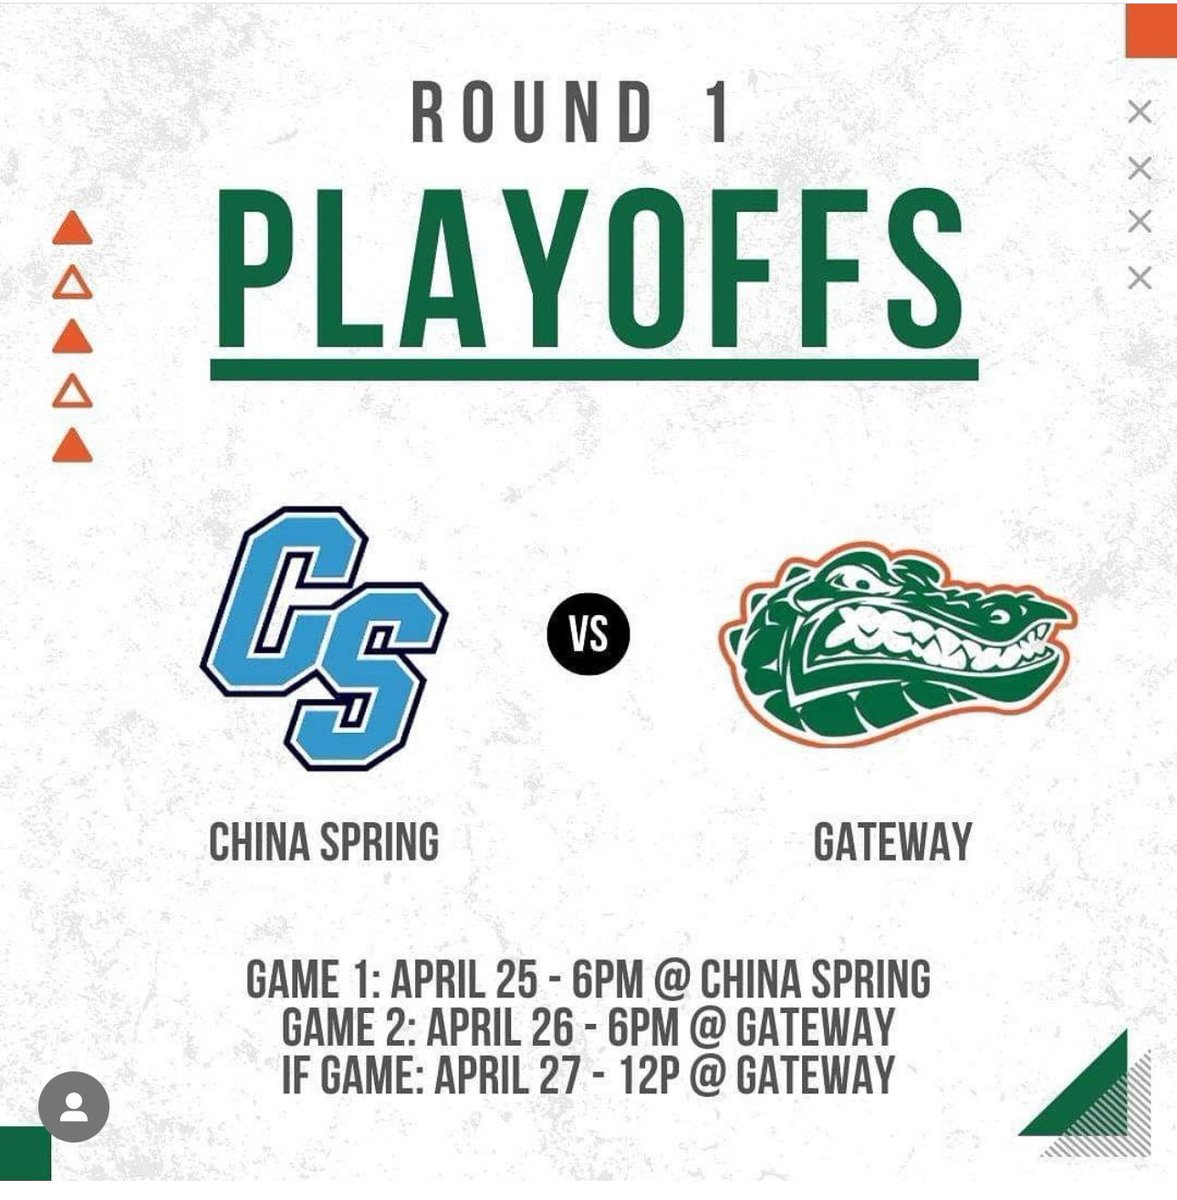 Gator 🐊 Fans the Lady Gators take game 1 against China Springs Thursday and play game 2 of the series tonight, in what should be an exciting game. Come out to Gateway College Prep School and show support for the girls!!  #GatorPride #GatorSB #SwampLife